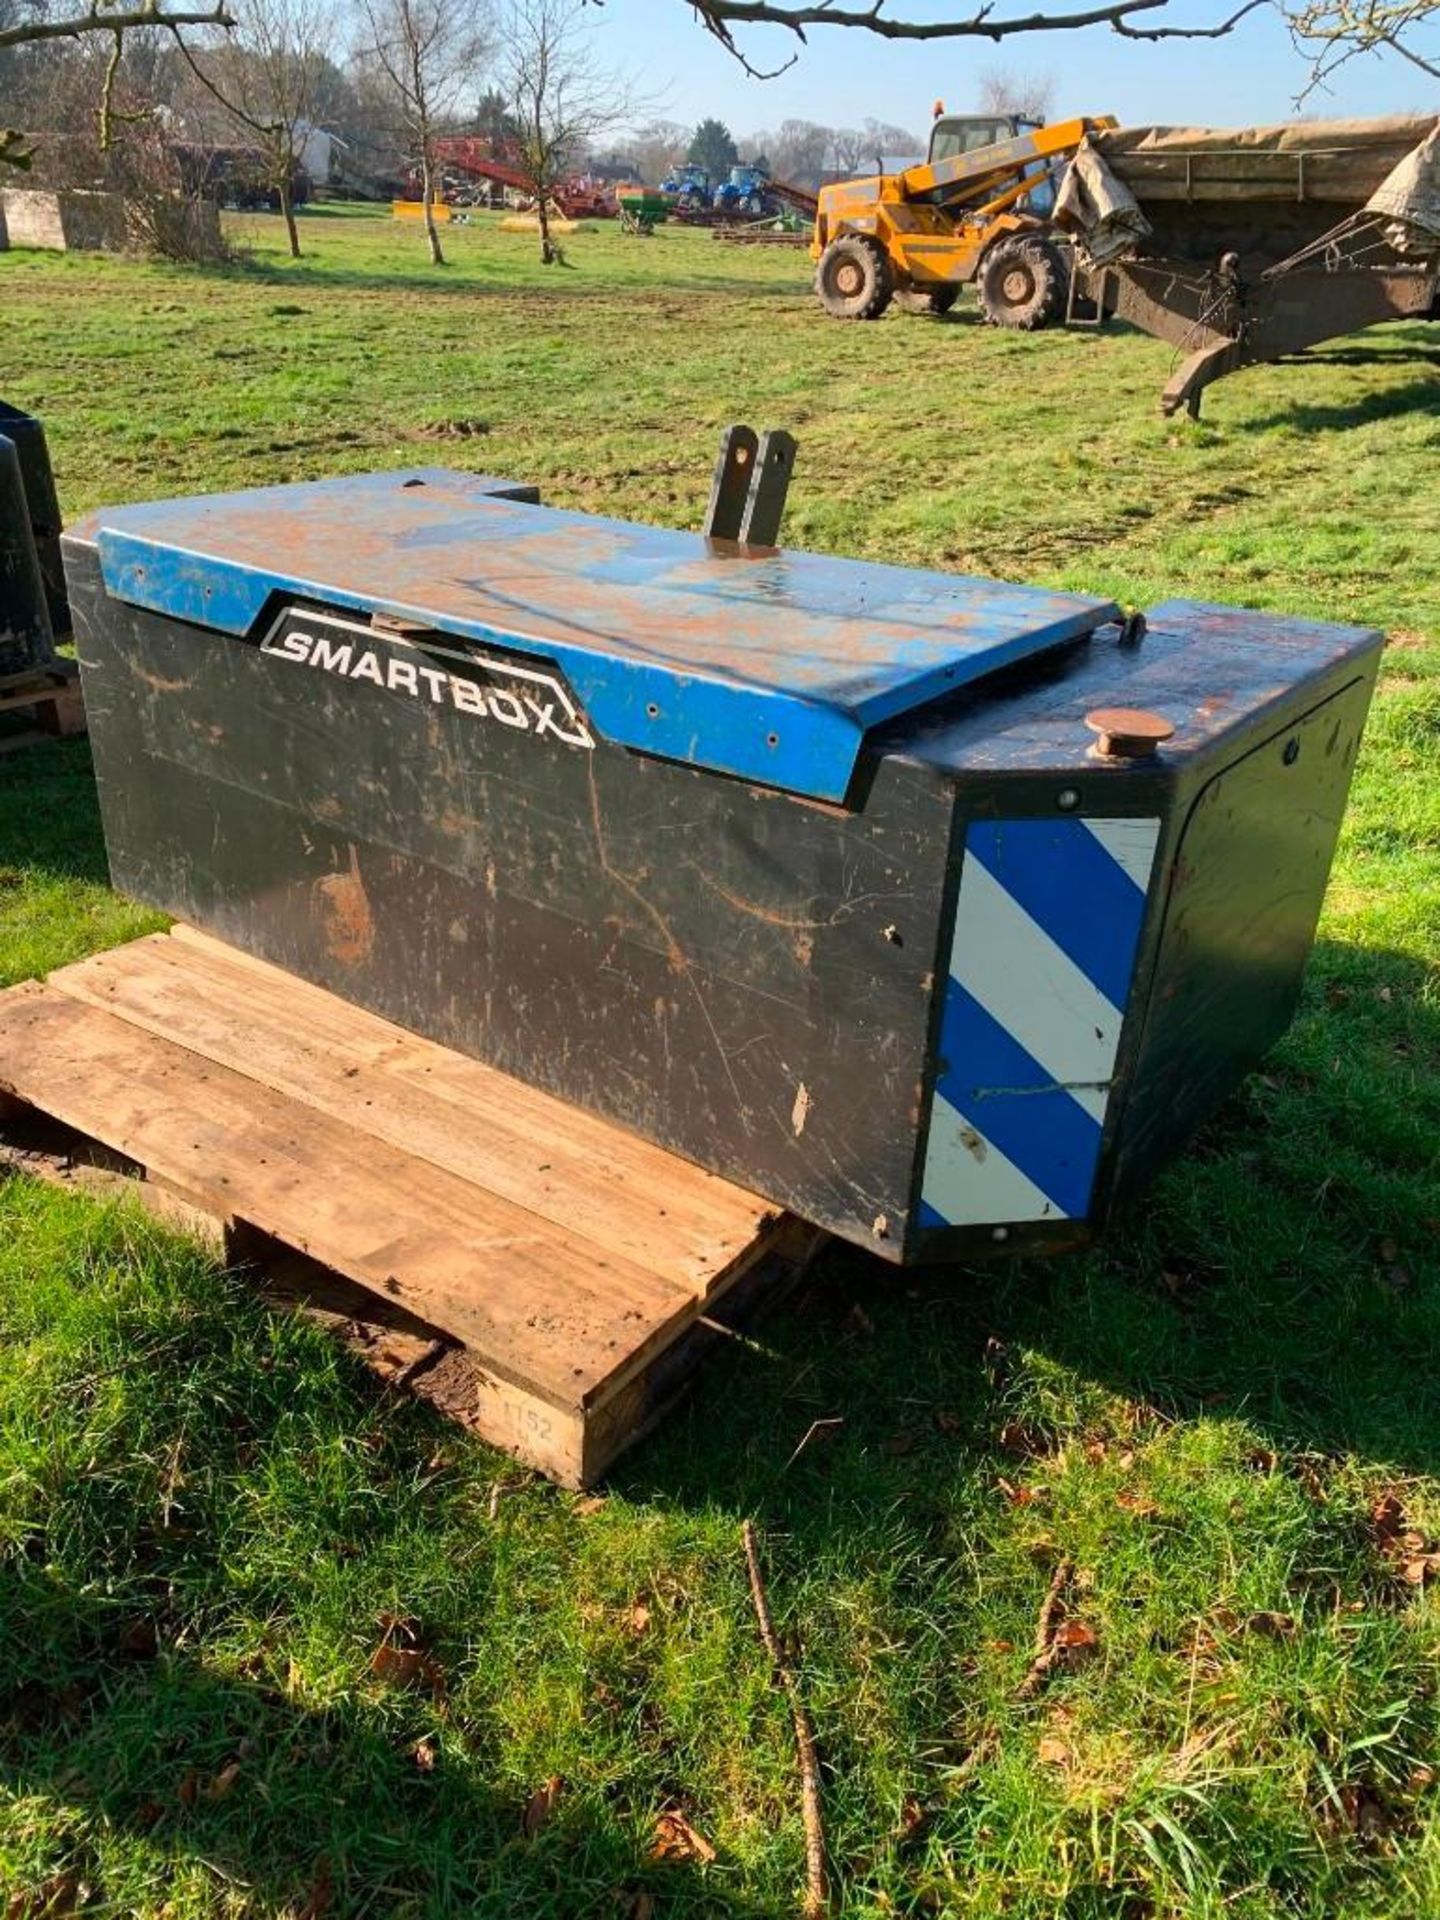 1,000kg Smartbox Weight Block / Toolbox, Removable 1 Tonne Weight - Image 2 of 6